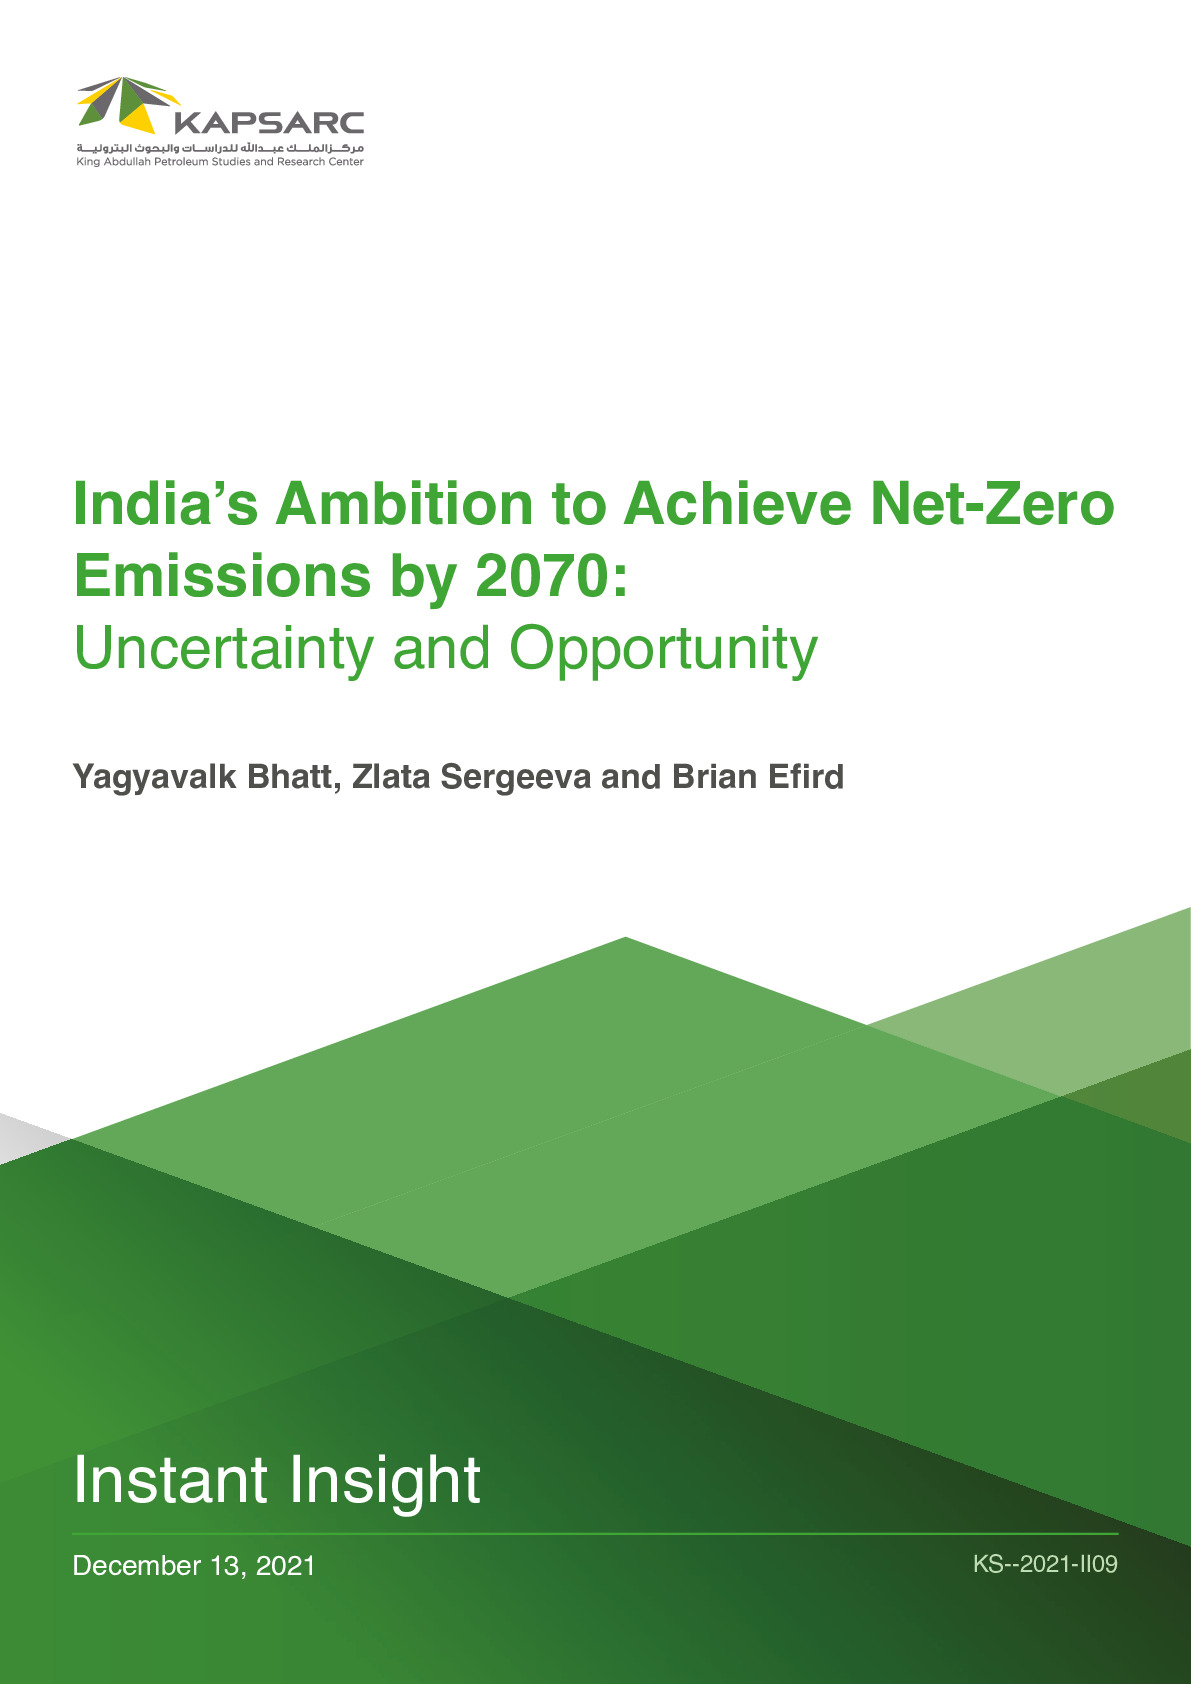 India’s Ambition to Achieve Net-Zero Emissions by 2070: Uncertainty and Opportunity